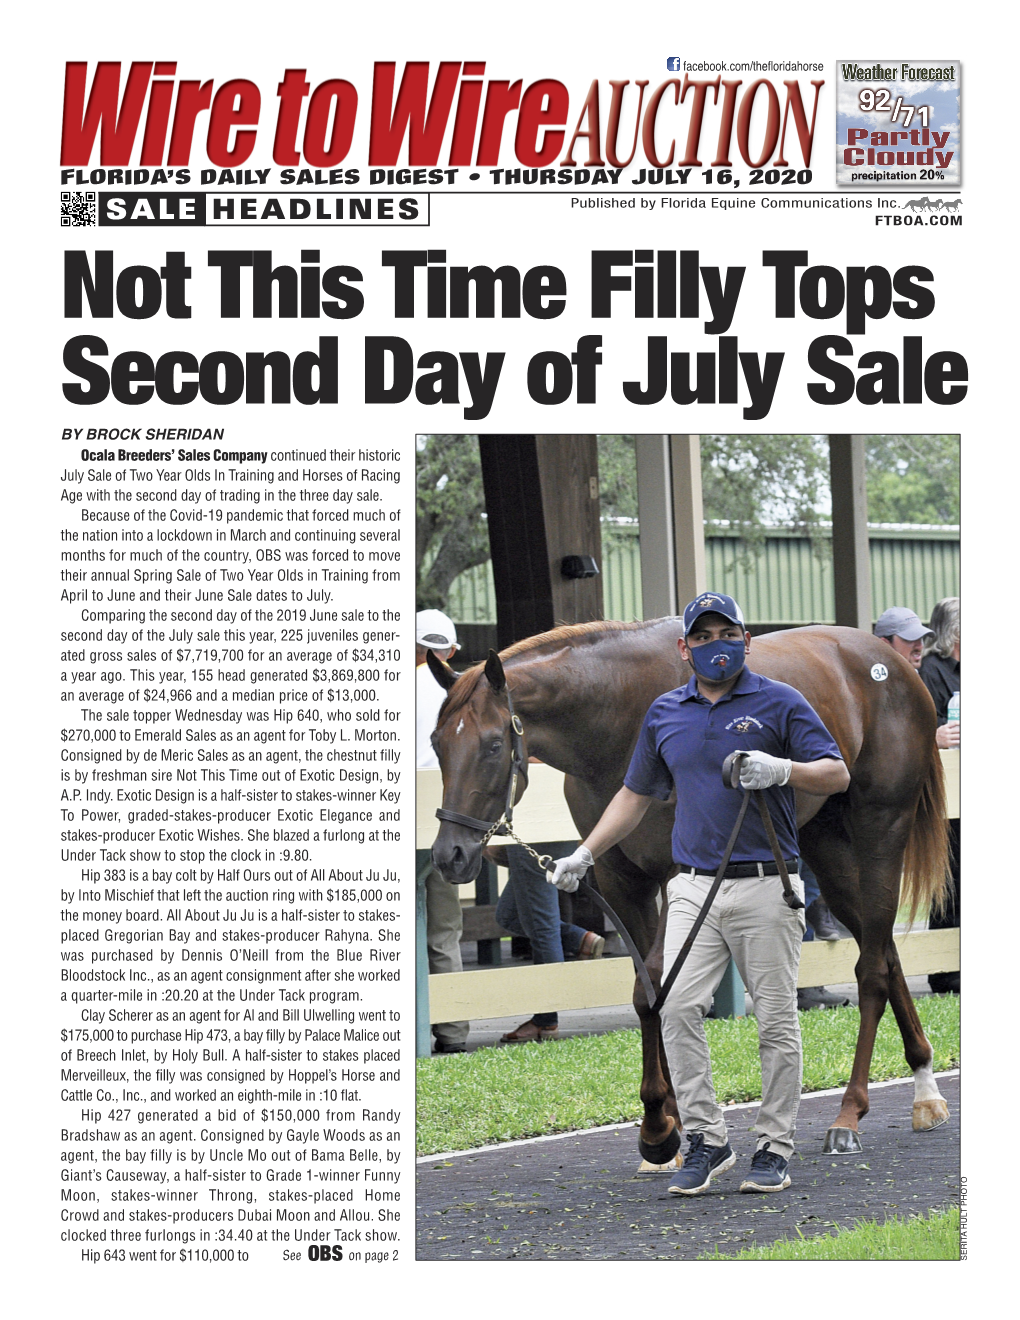 Not This Time Filly Tops Second Day of July Sale